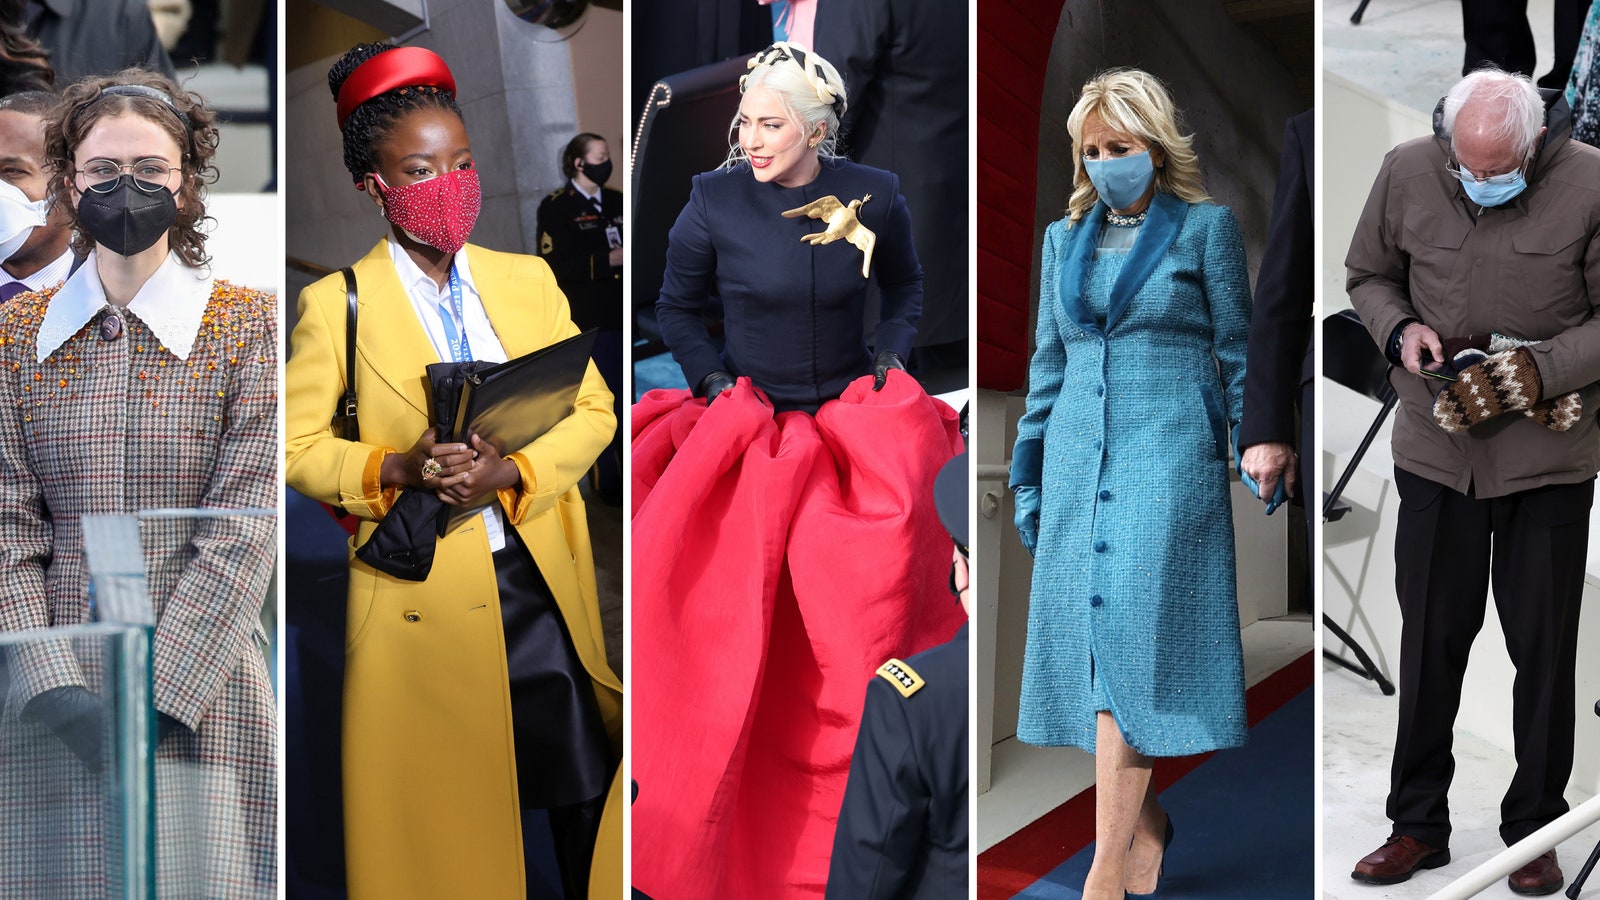 “In Fashion”: Who’s Fashionable at the US Presidential Inauguration?